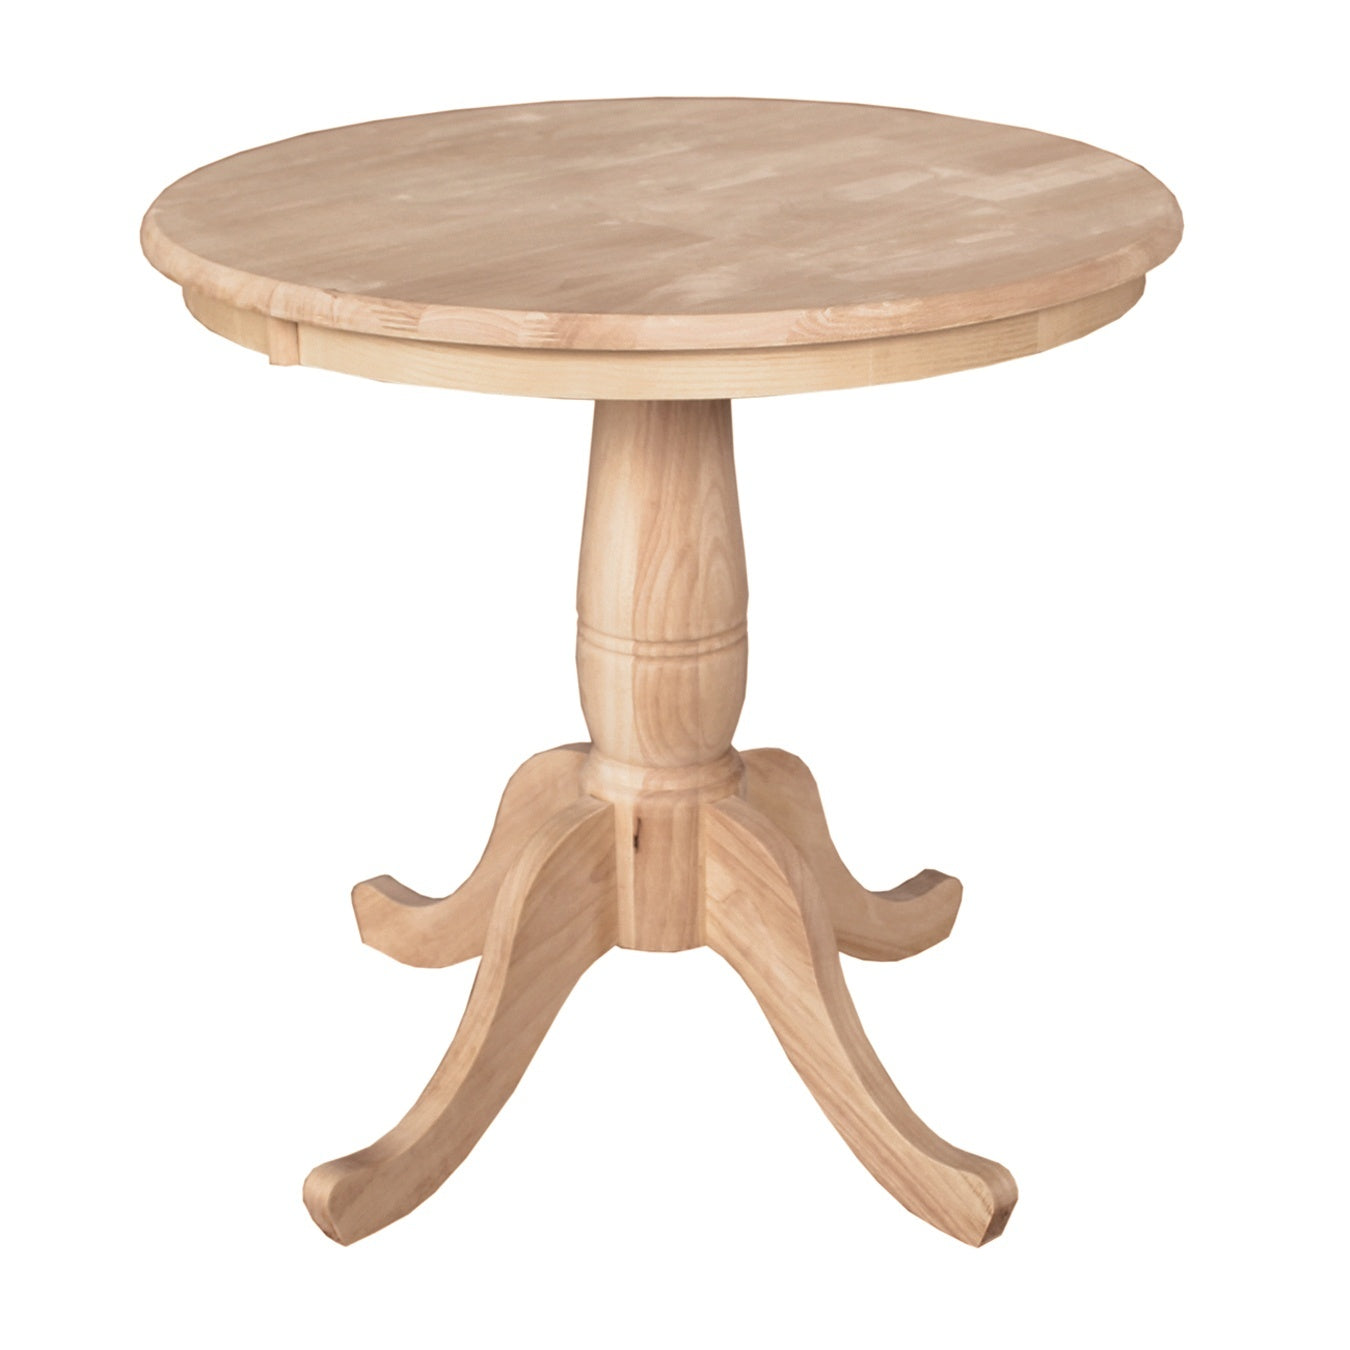 [30 Inch] Classic Round Table - Unfinished